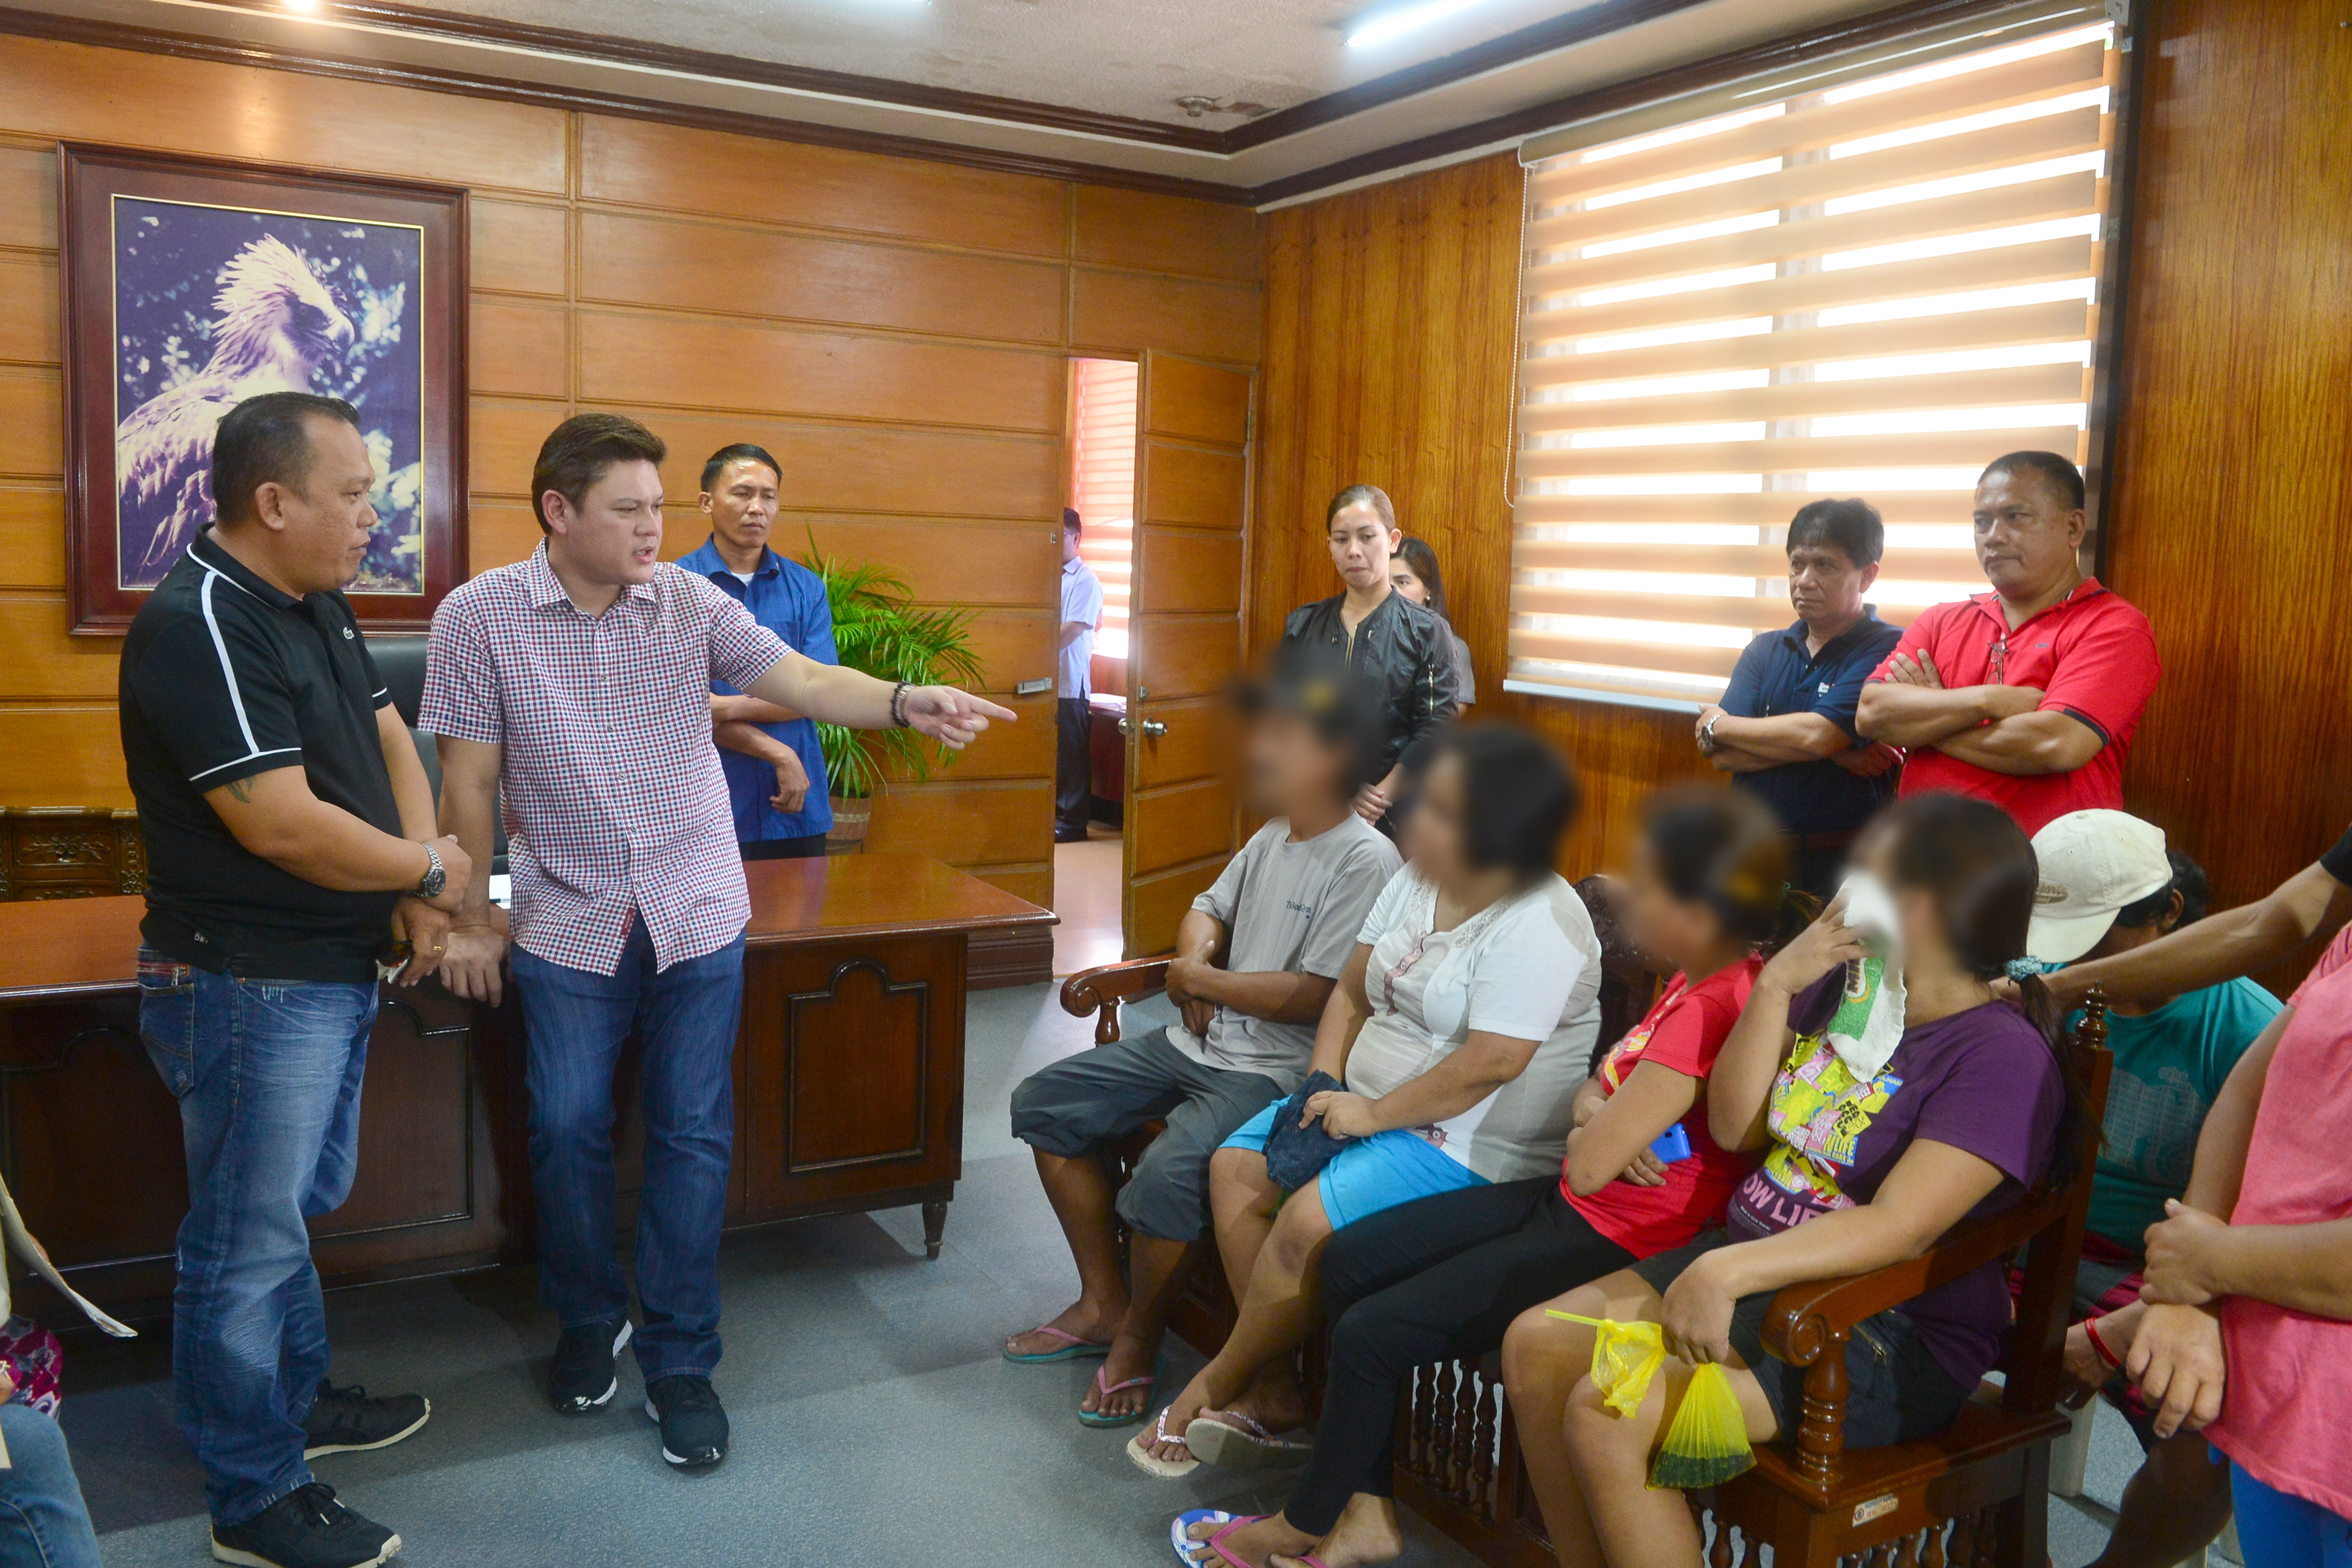 At least seven (7) self-confessed drug pushers surrendered to acting Davao City Mayor Paolo Duterte Monday. All seven were turned over by Councillor Edgar Ibuyan Jr. (Davao City Information Office)